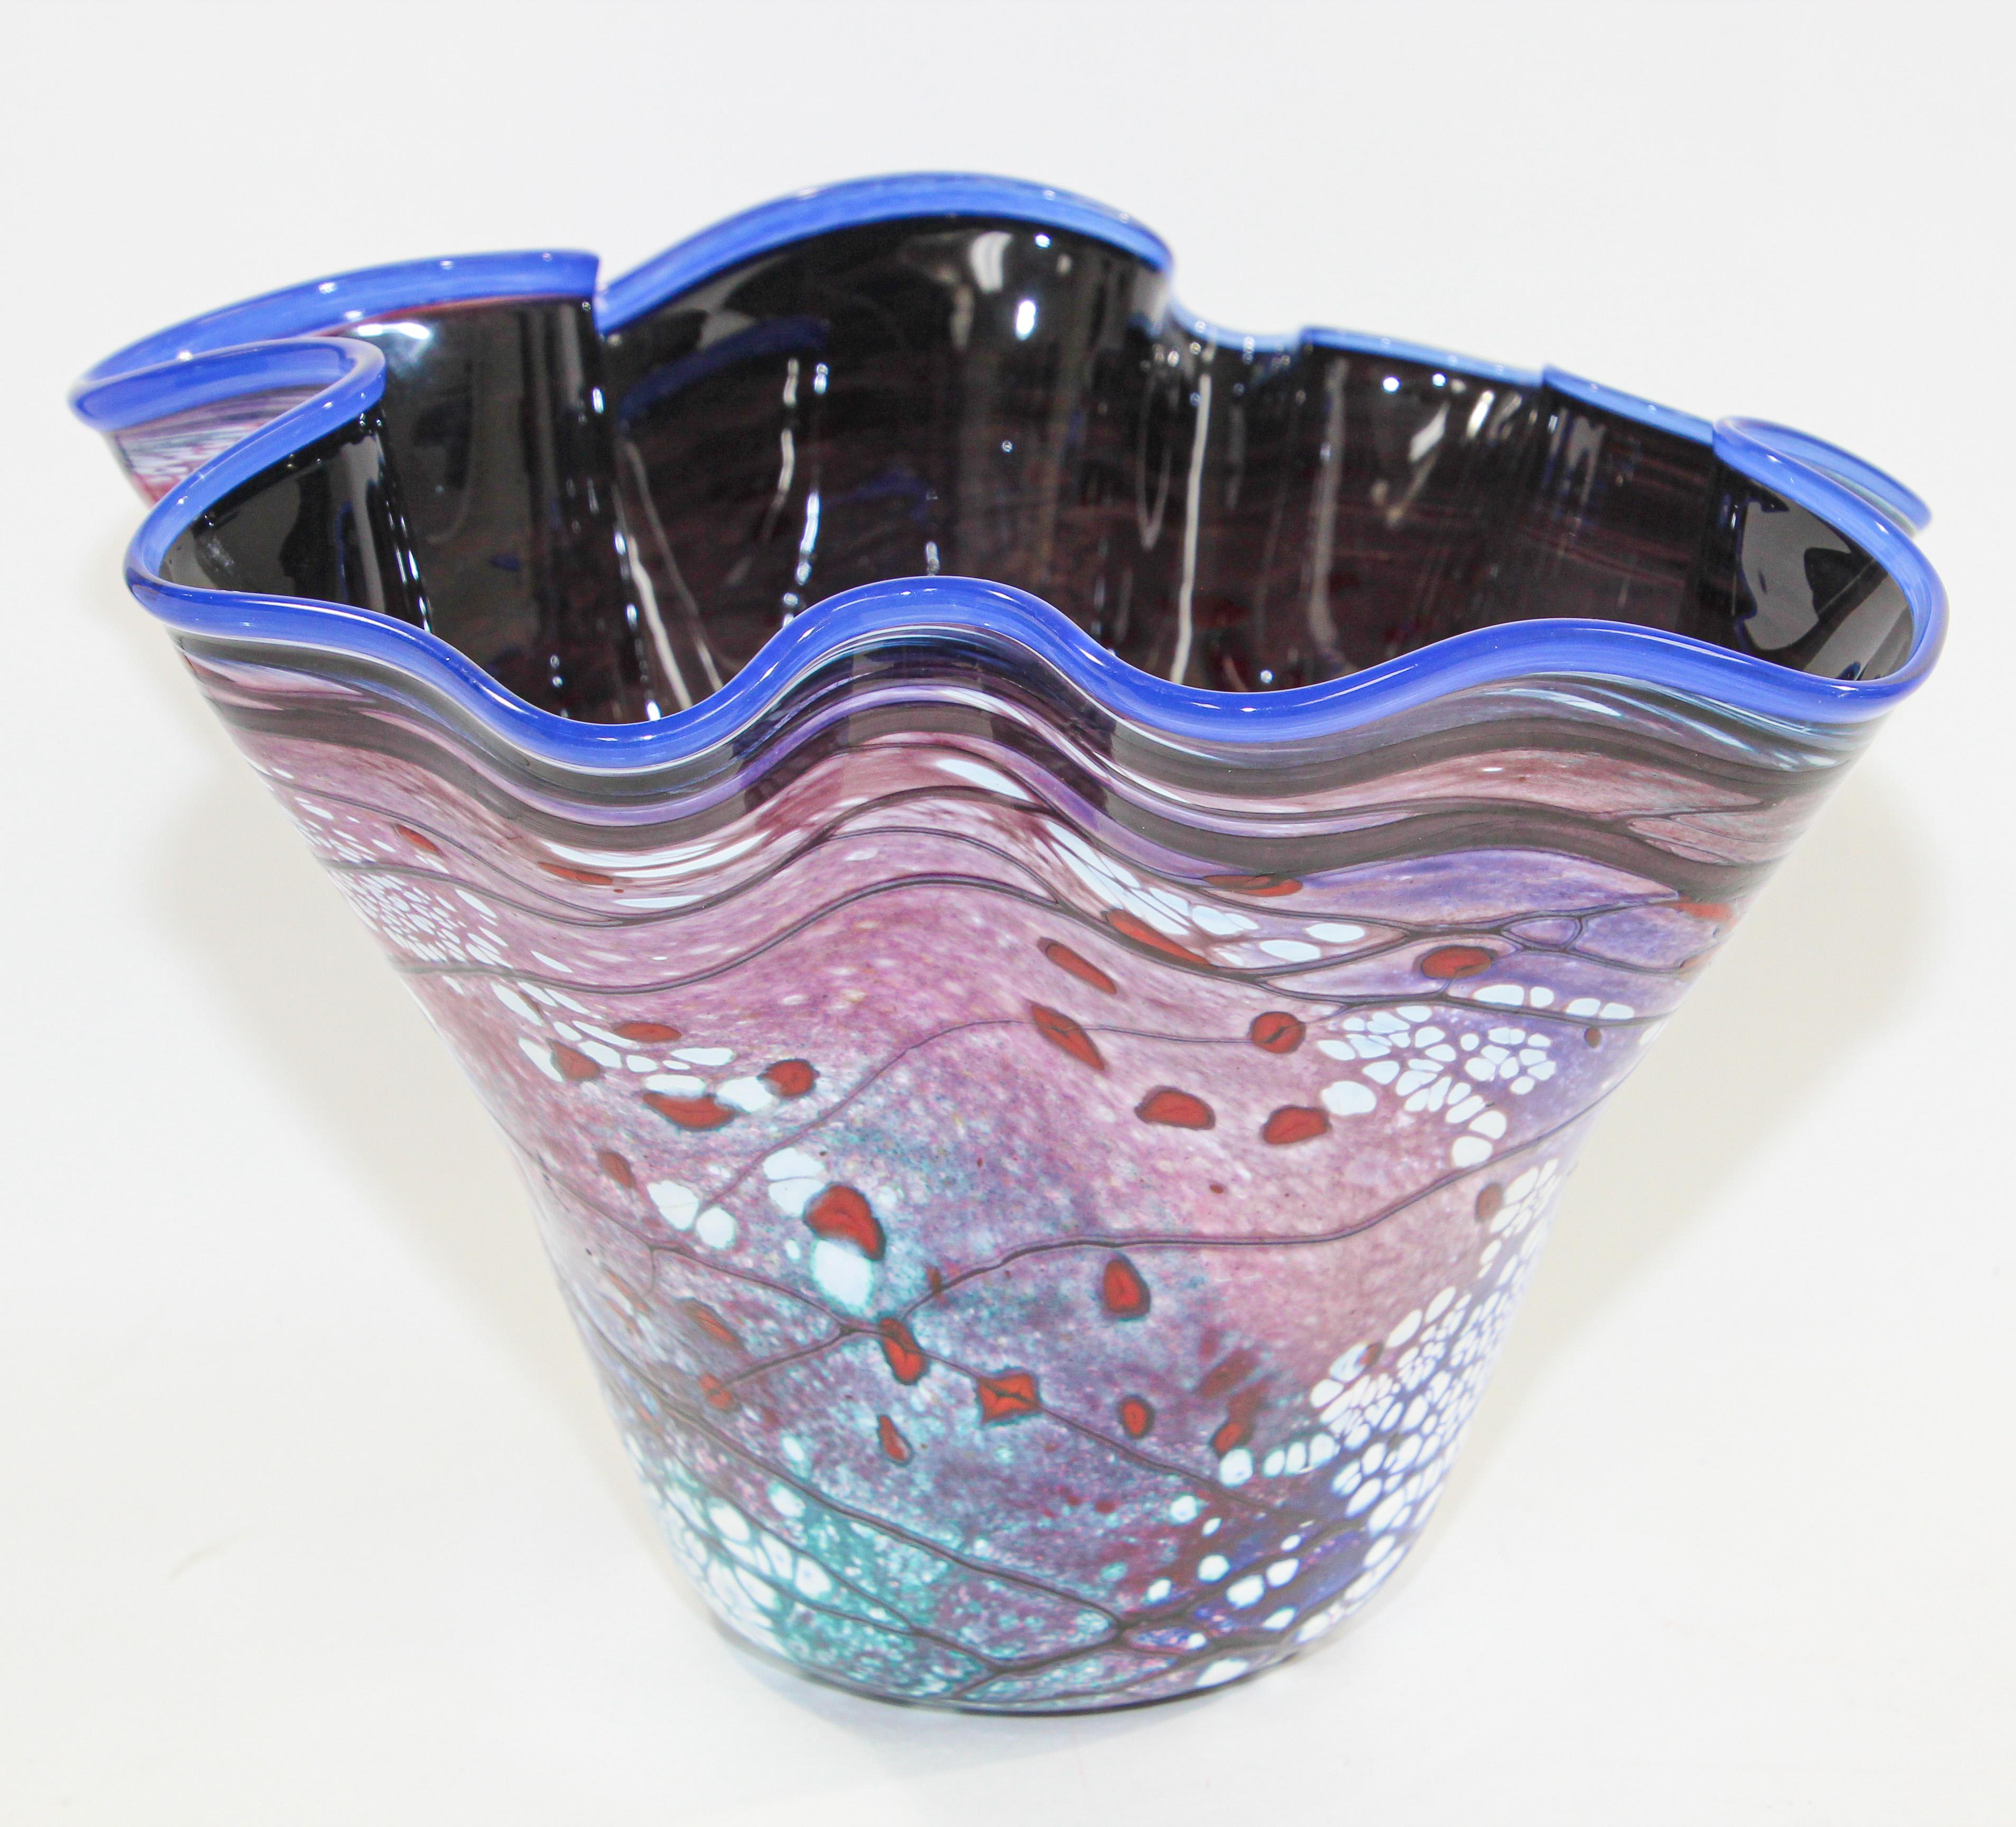 Free form organic modern contemporary blown art glass vase.
Dark blue Inside with multicolored designs outside. 
Signed by Artist Bill Kasper. 
Overall Condition Good
Size 10